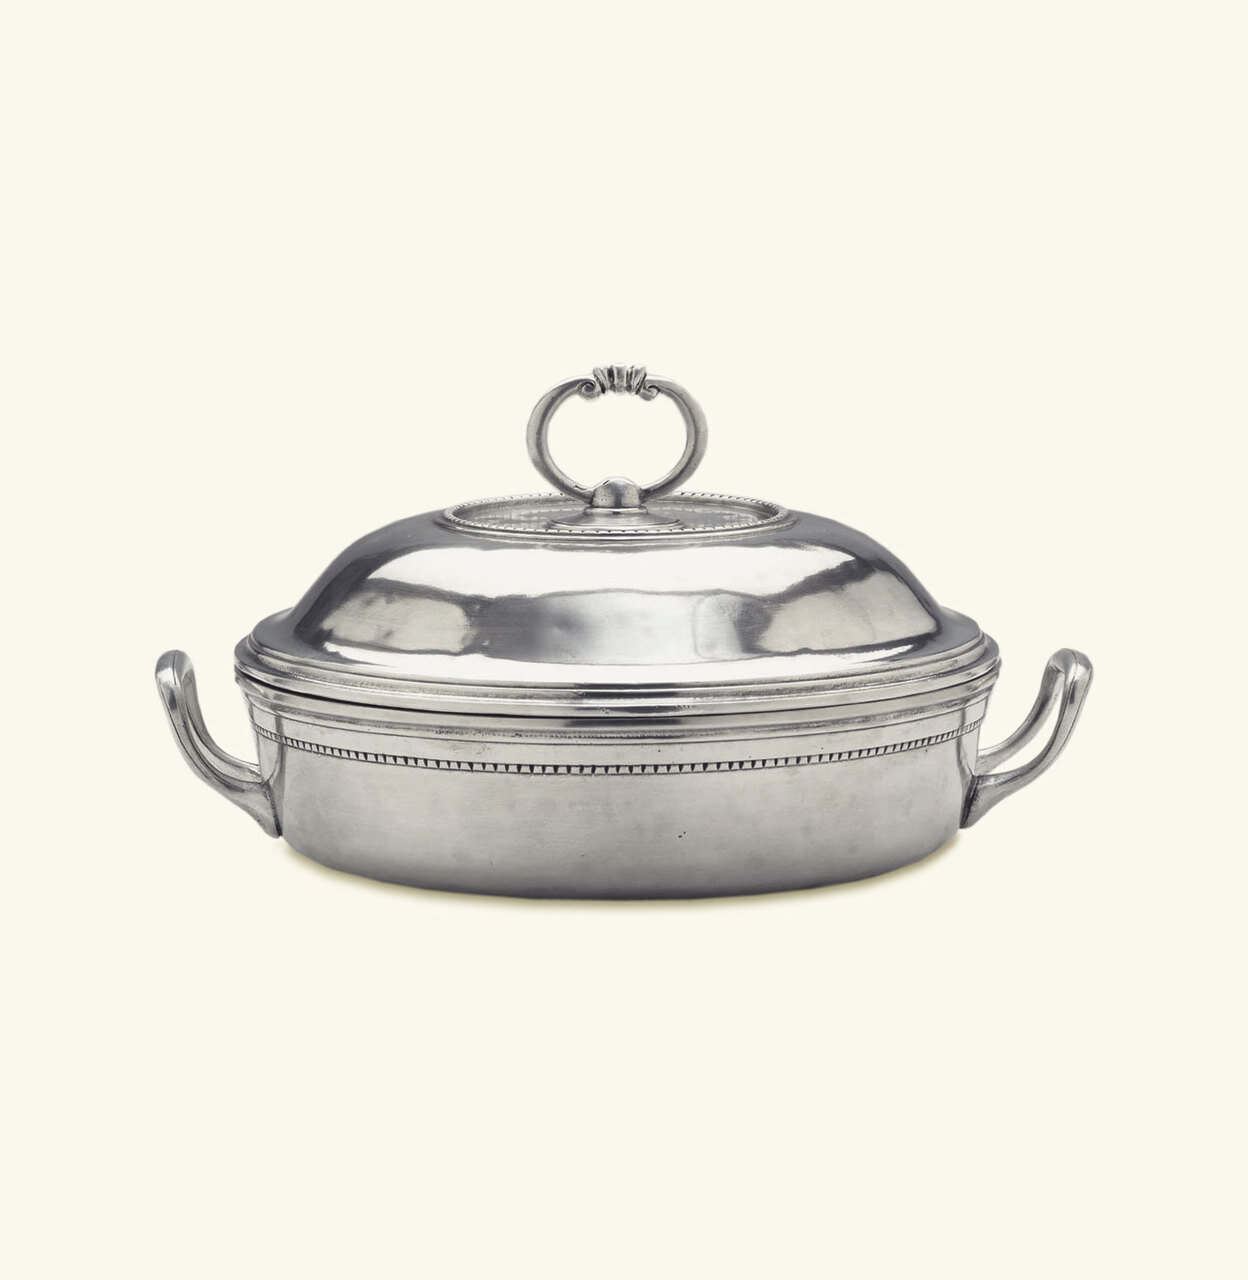 Match Pewter Toscana Round Pyrex Casserole Dish With Lid